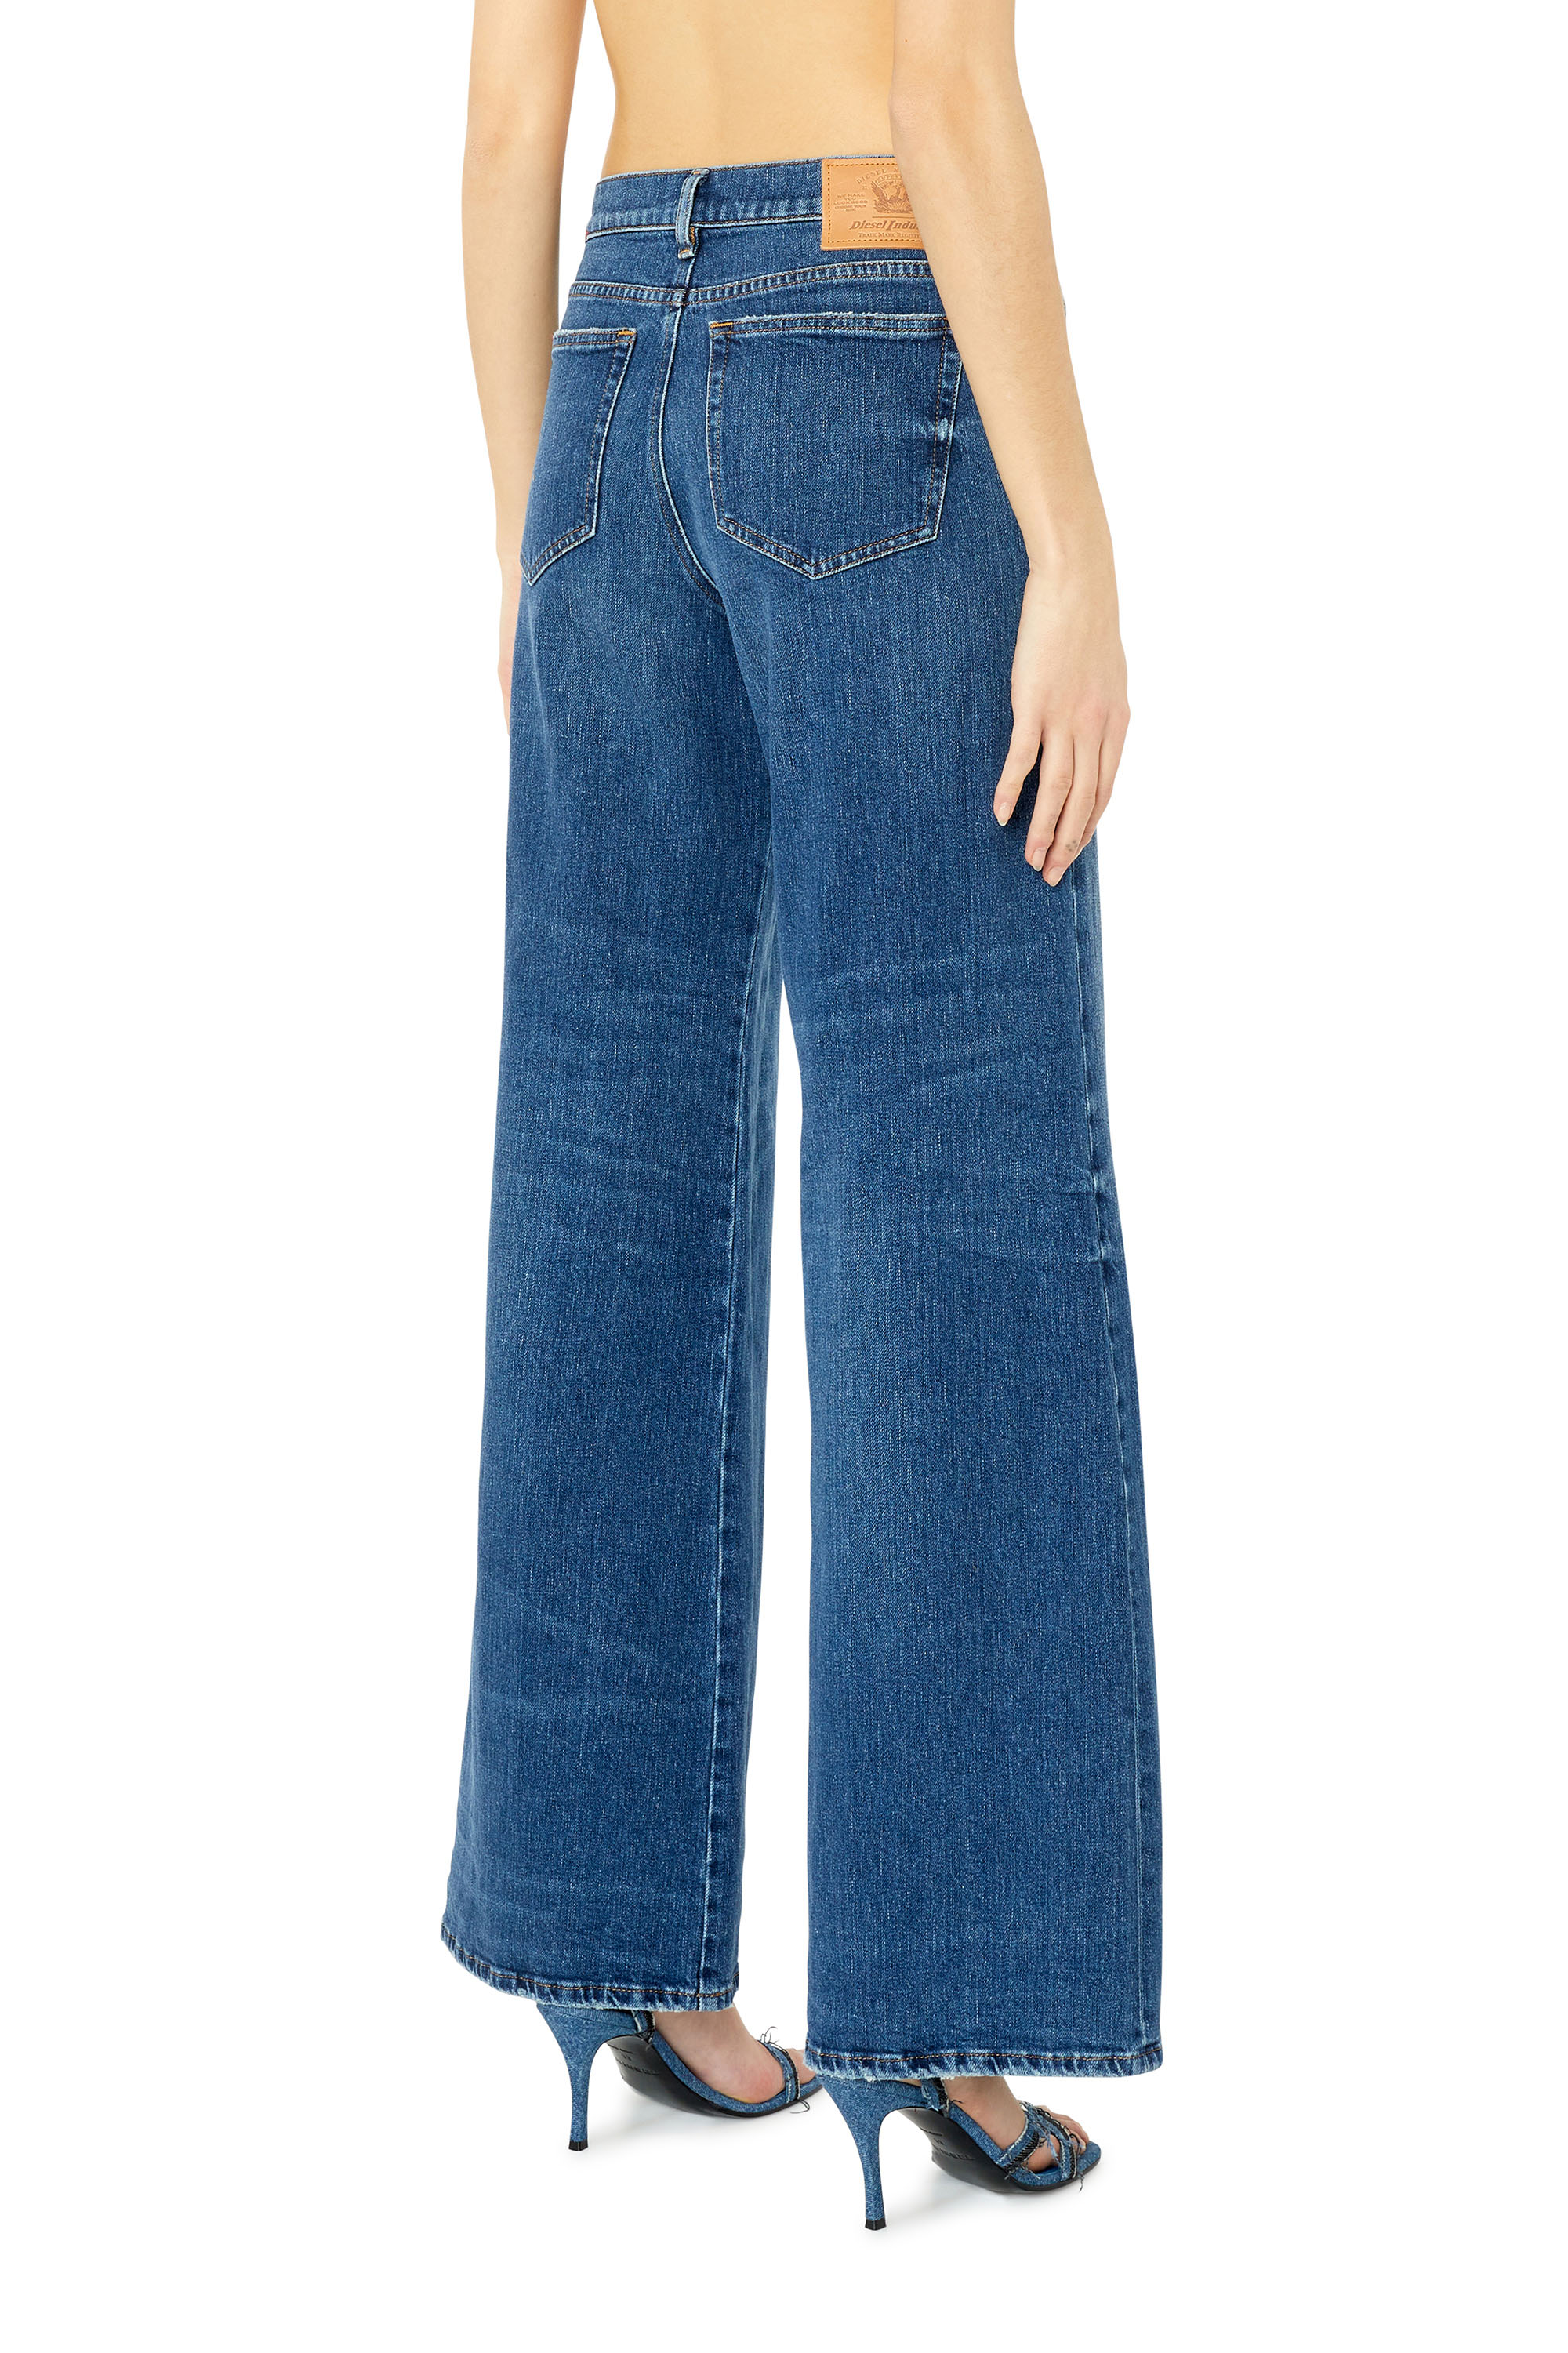 Bootcut and Flare Jeans 1978 D-Akemi 007L1